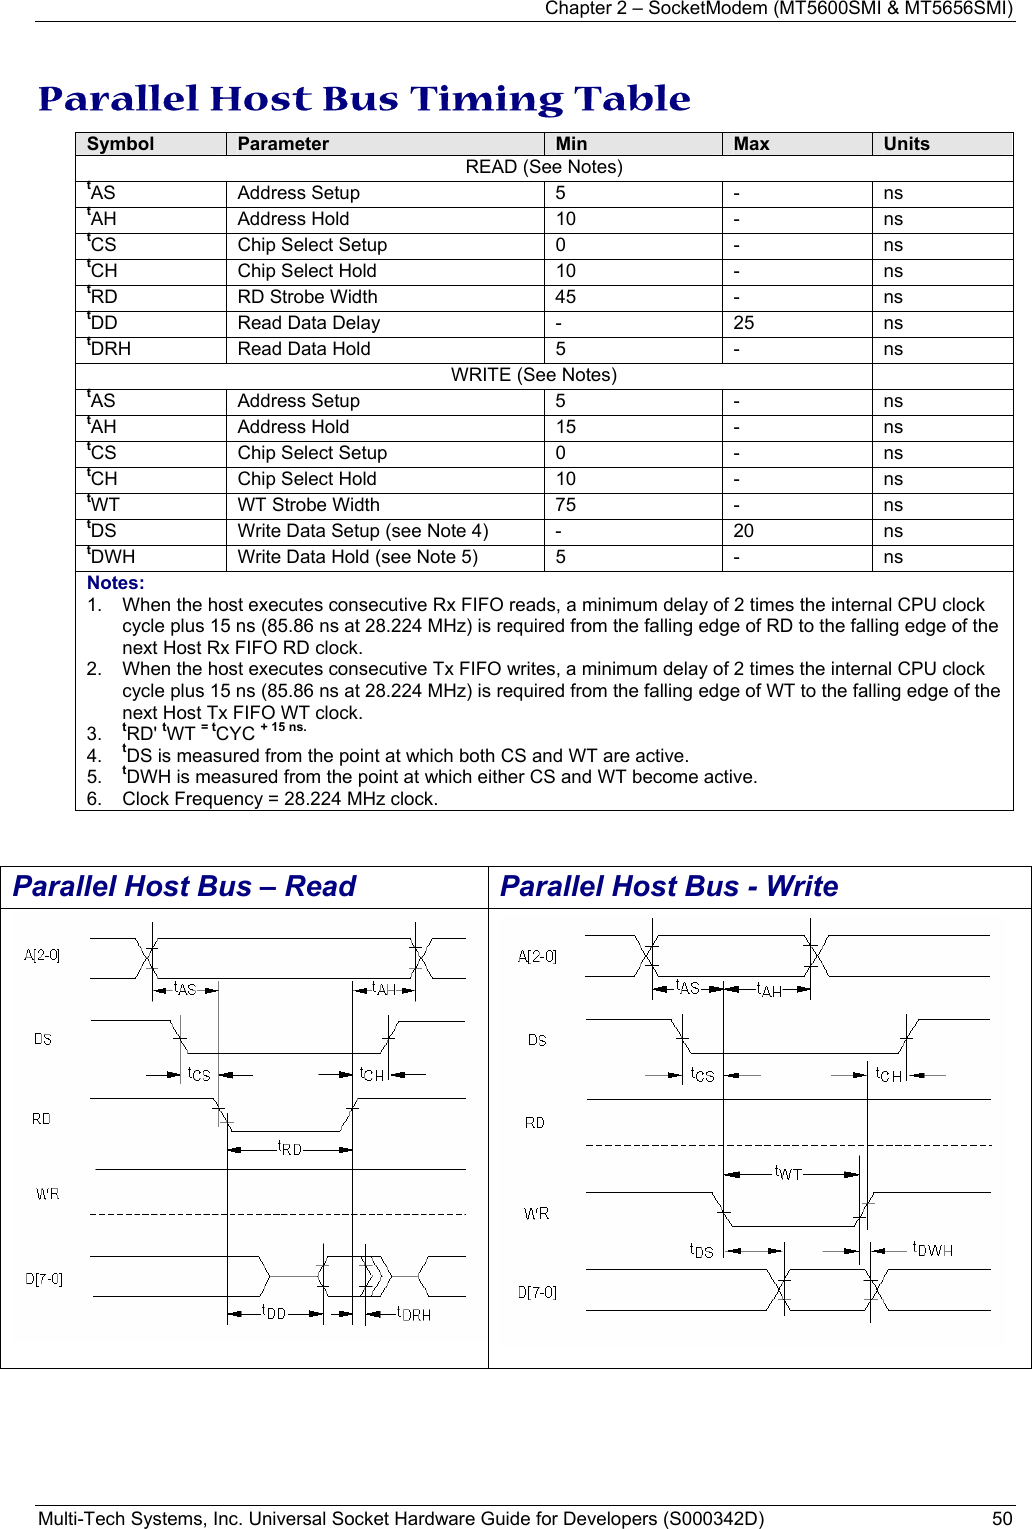 Chapter 2 – SocketModem (MT5600SMI &amp; MT5656SMI) Multi-Tech Systems, Inc. Universal Socket Hardware Guide for Developers (S000342D)  50  Parallel Host Bus Timing Table Symbol  Parameter  Min  Max  Units READ (See Notes) tAS  Address Setup  5  -  ns tAH  Address Hold  10  -  ns tCS  Chip Select Setup  0  -  ns tCH Chip Select Hold  10  -  ns tRD RD Strobe Width  45  -  ns tDD Read Data Delay  -  25  ns tDRH Read Data Hold  5  -  ns                        WRITE (See Notes)   tAS  Address Setup  5  -  ns tAH  Address Hold  15  -  ns tCS  Chip Select Setup  0  -  ns tCH Chip Select Hold  10  -  ns tWT WT Strobe Width  75  -  ns tDS Write Data Setup (see Note 4)  -  20  ns tDWH Write Data Hold (see Note 5)  5  -  ns Notes: 1.  When the host executes consecutive Rx FIFO reads, a minimum delay of 2 times the internal CPU clock cycle plus 15 ns (85.86 ns at 28.224 MHz) is required from the falling edge of RD to the falling edge of the next Host Rx FIFO RD clock. 2.  When the host executes consecutive Tx FIFO writes, a minimum delay of 2 times the internal CPU clock cycle plus 15 ns (85.86 ns at 28.224 MHz) is required from the falling edge of WT to the falling edge of the next Host Tx FIFO WT clock. 3.  tRD&apos; tWT = tCYC + 15 ns. 4.  tDS is measured from the point at which both CS and WT are active. 5.  tDWH is measured from the point at which either CS and WT become active. 6.  Clock Frequency = 28.224 MHz clock.   Parallel Host Bus – Read Parallel Host Bus - Write     